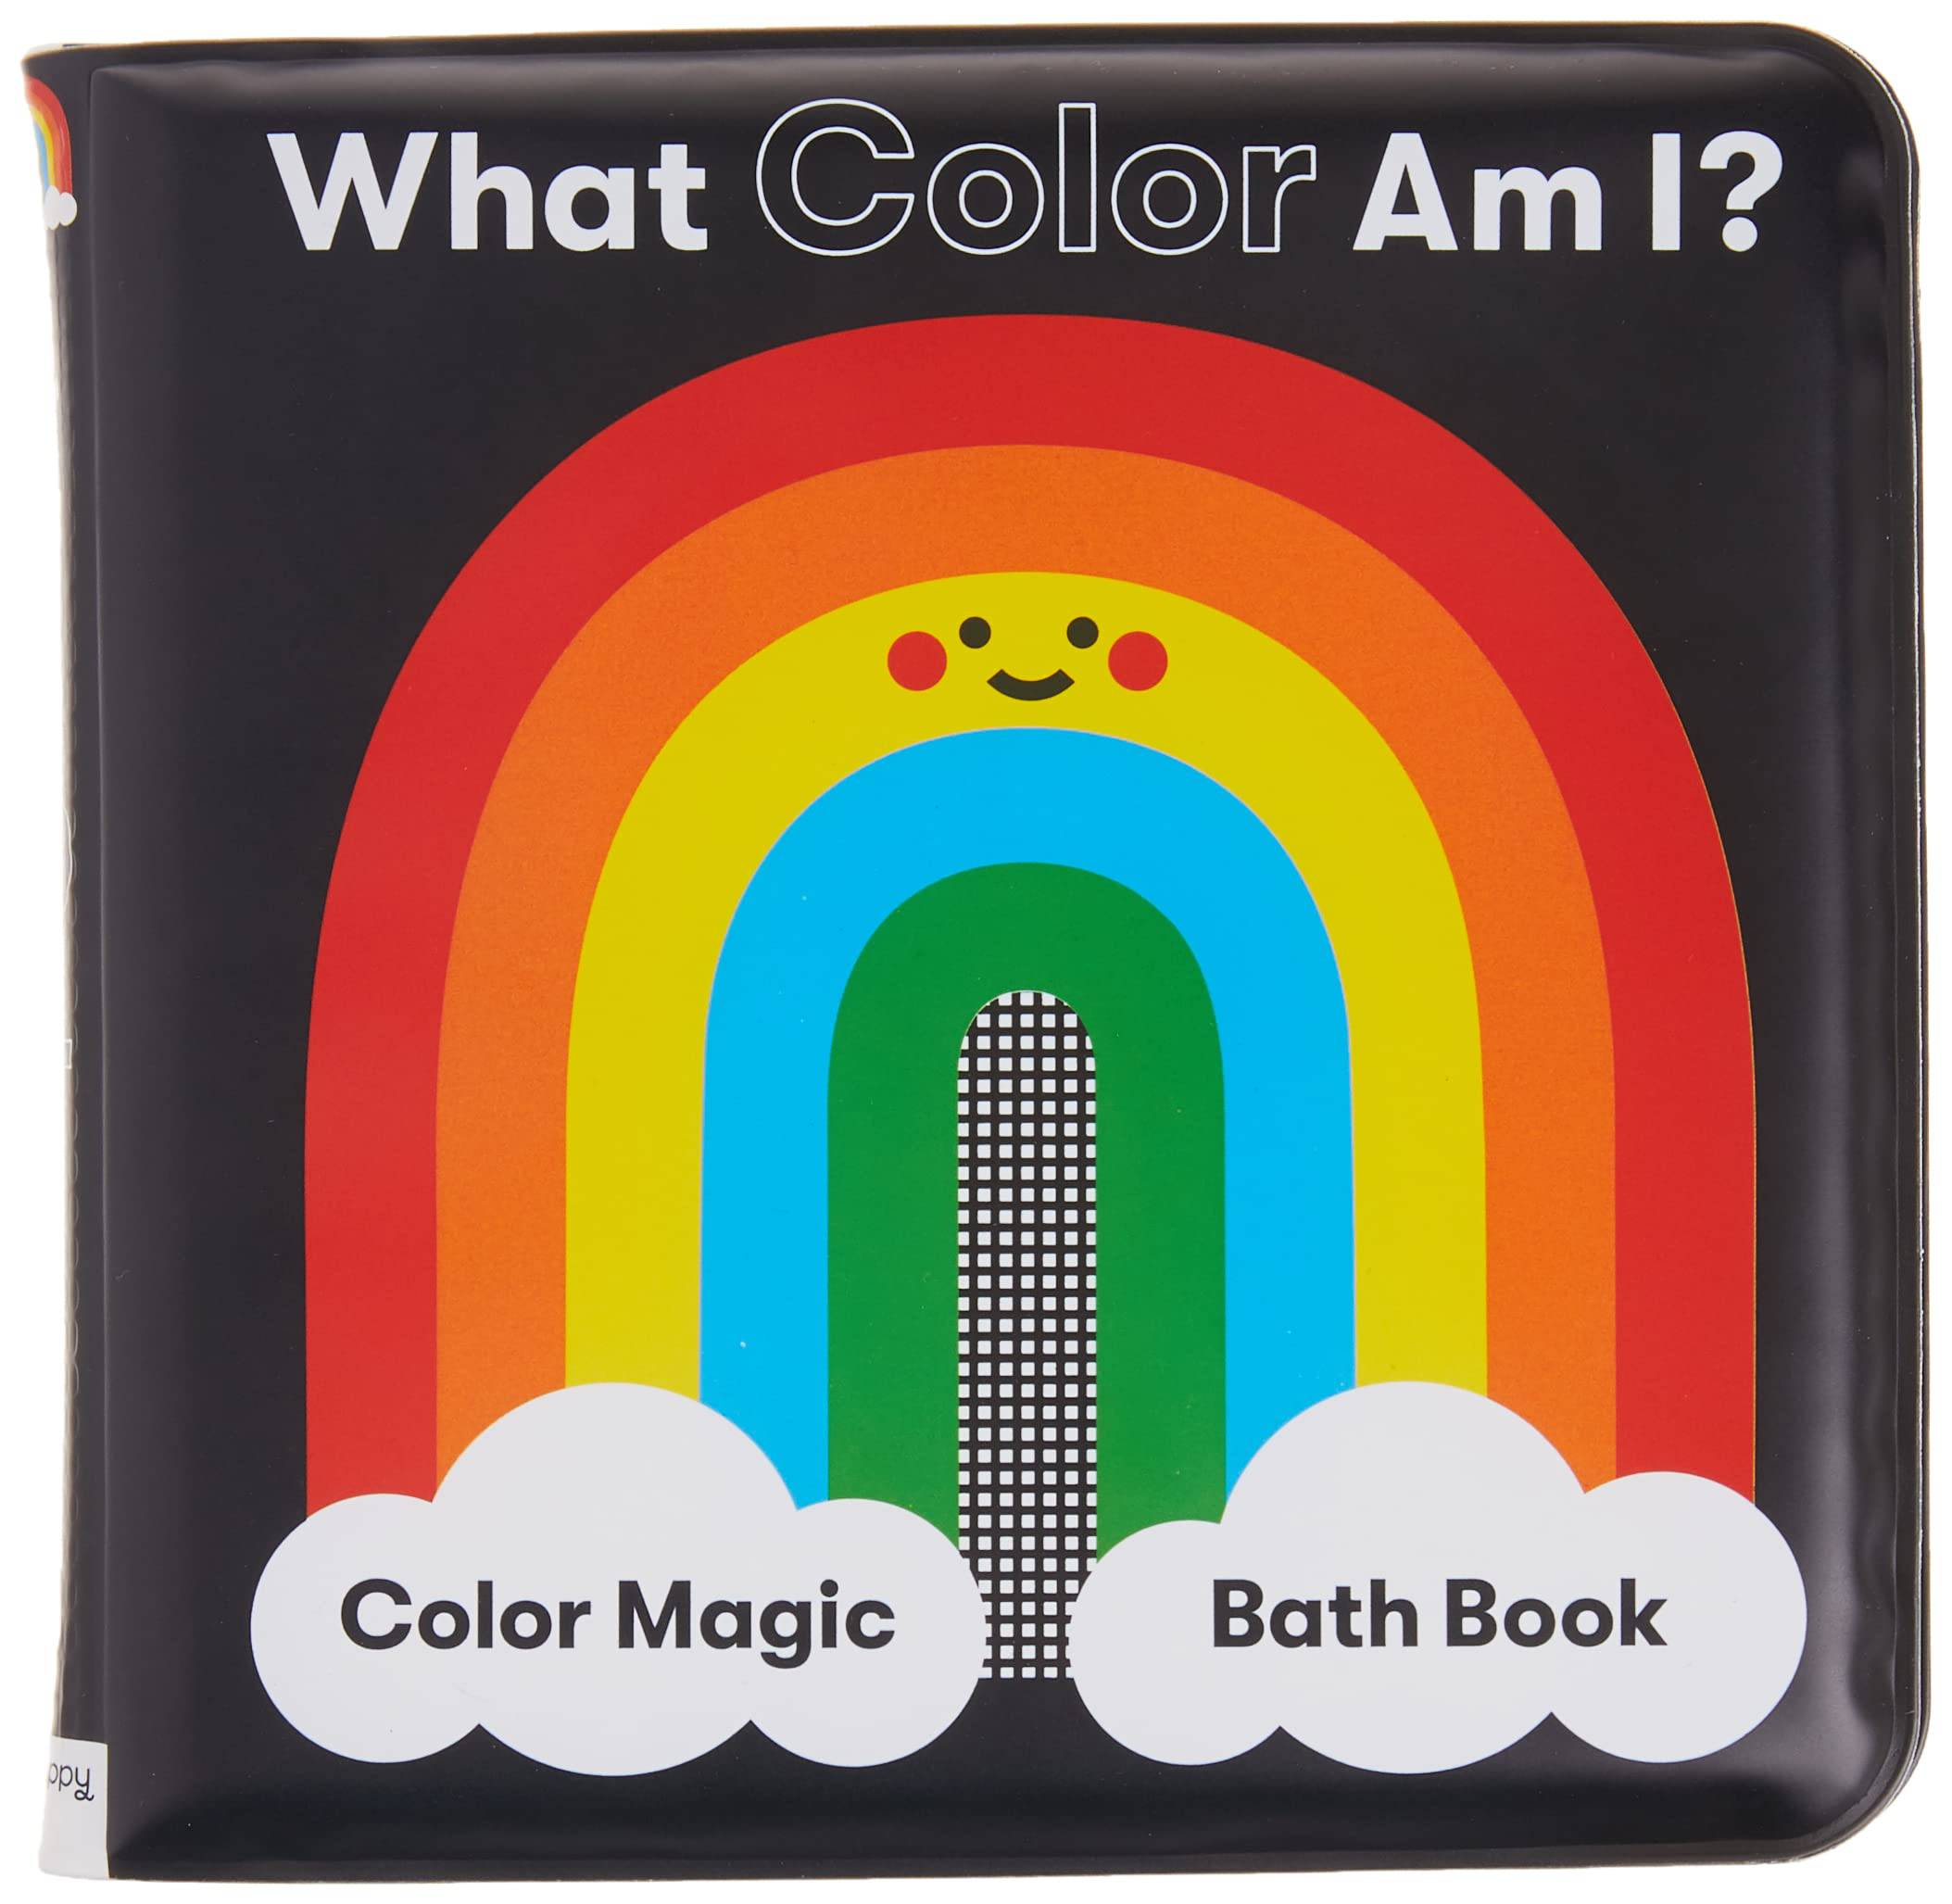 What Color Am I? Magic Bath Book - Twinkle Twinkle Little One